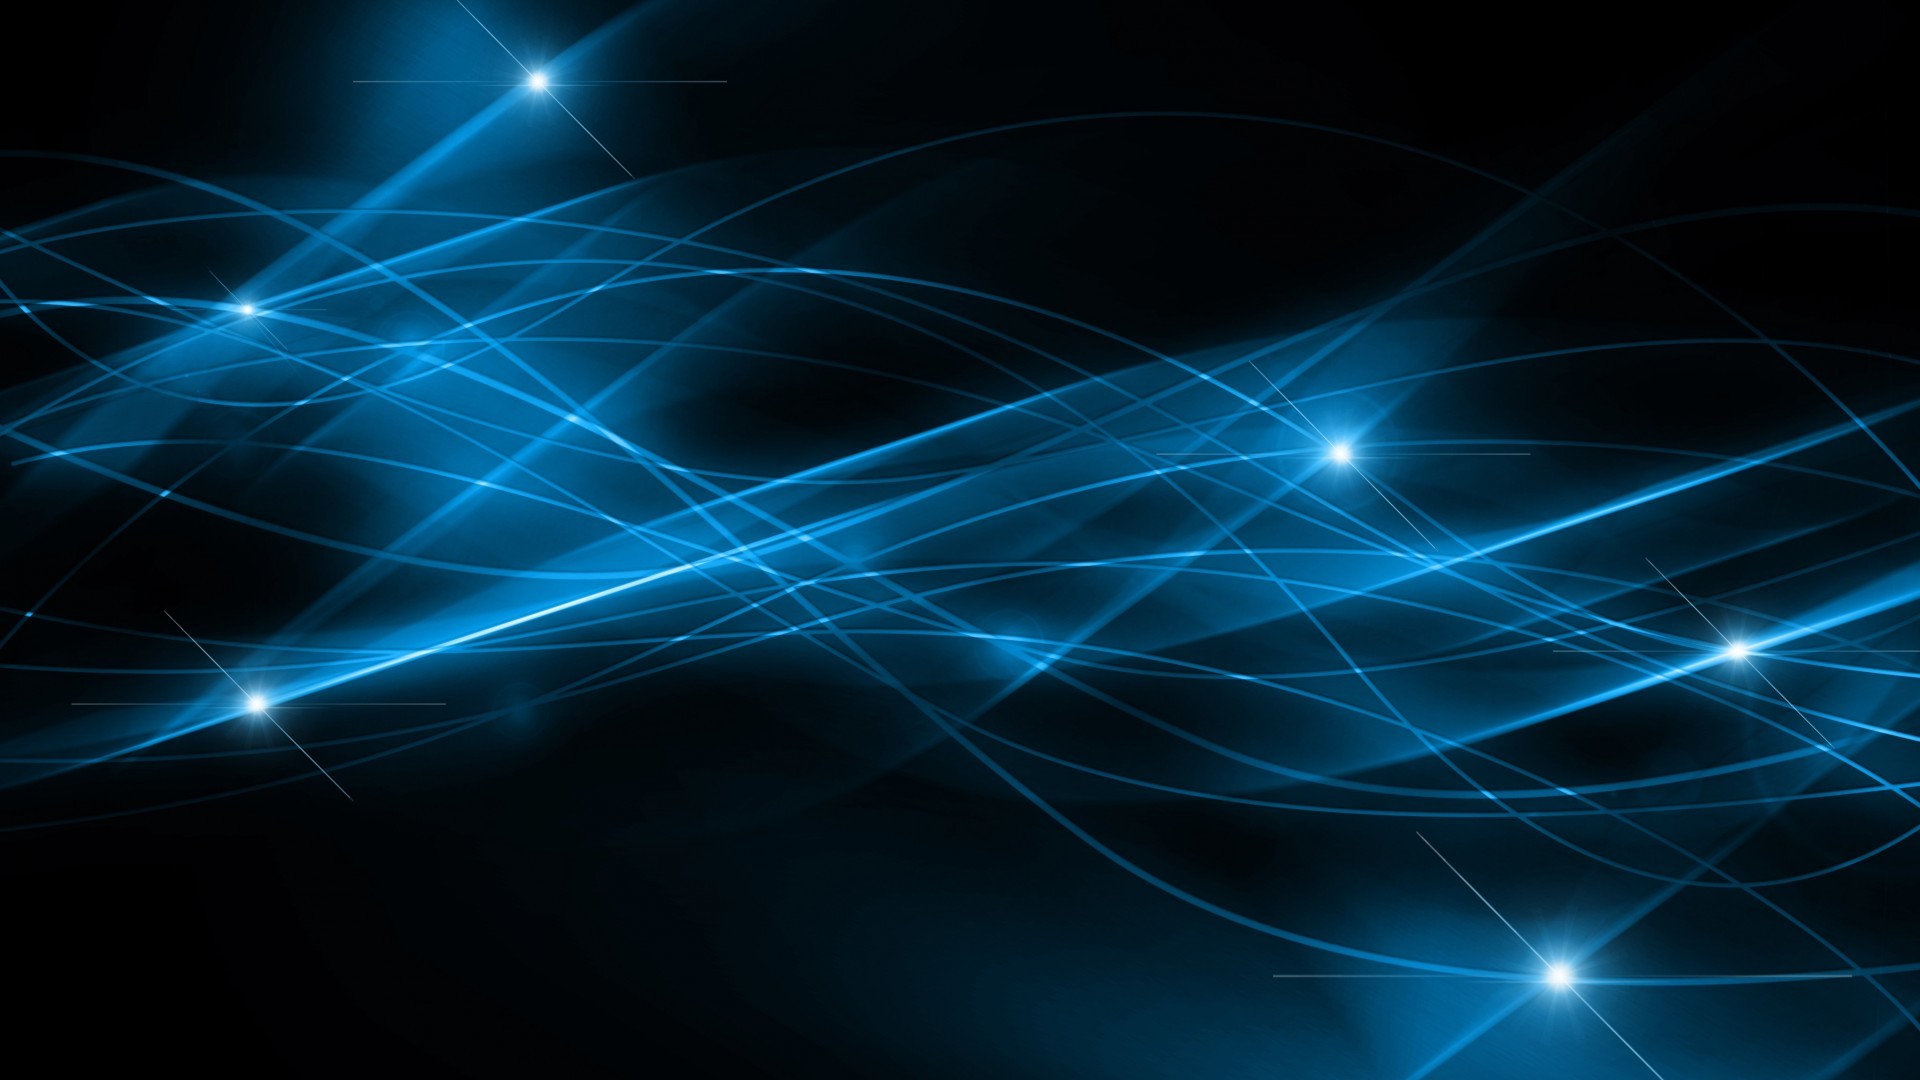 1920x1080 1080 • Black And Blue Abstract Backgrounds Hd 1080P 12 HD Wallpapers .